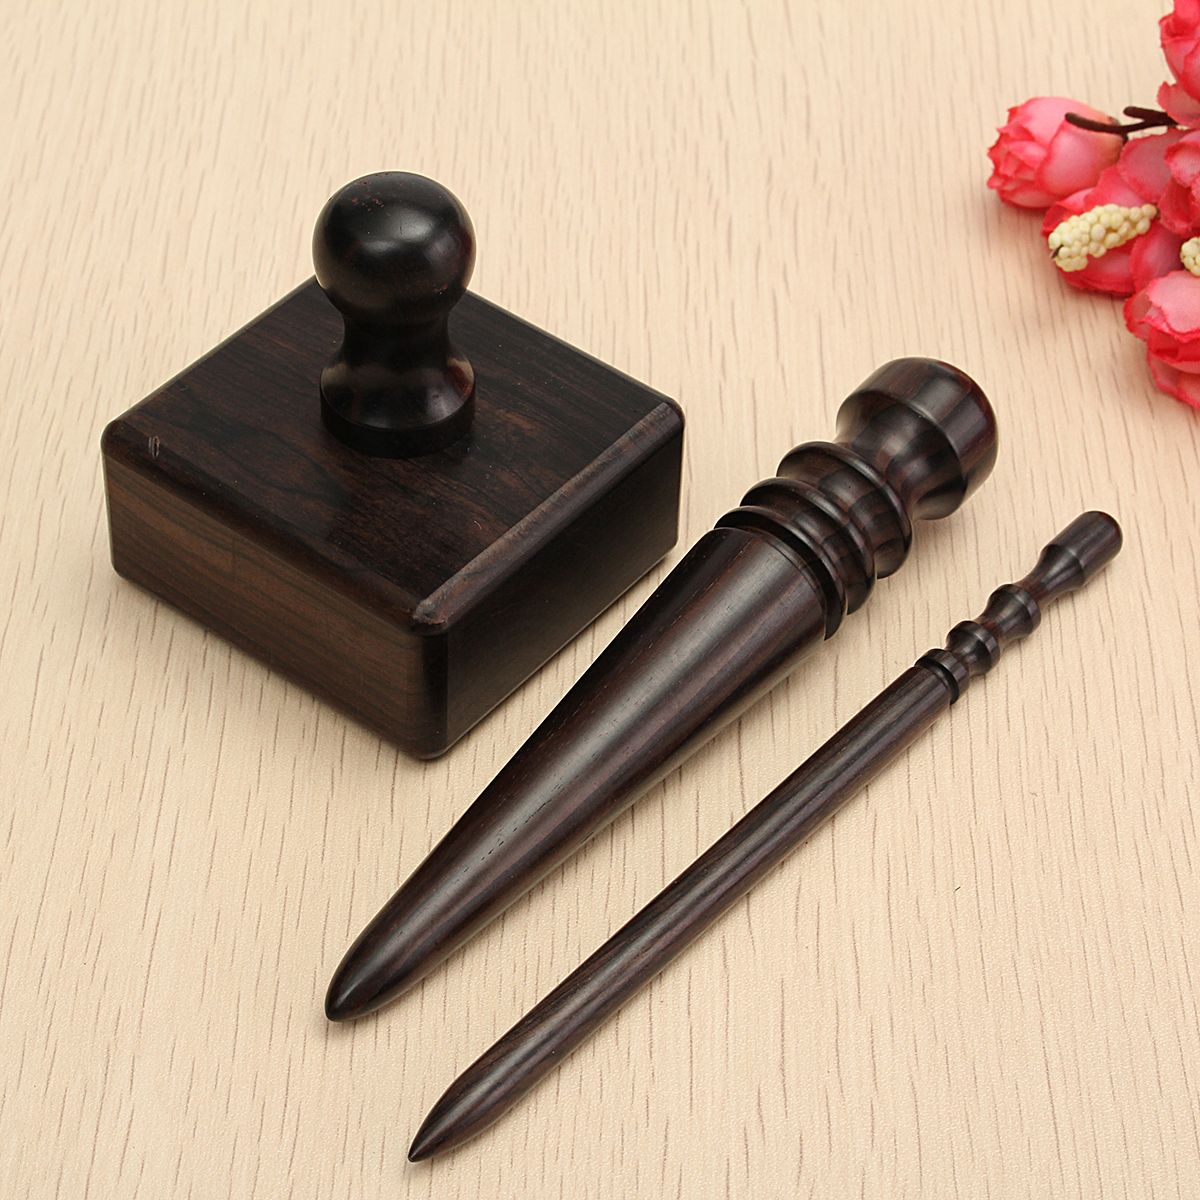 DIY-Leather-Craft-Hand-Tool-Trimming-Slicker-Wooden-Stick-3-Size-1107342